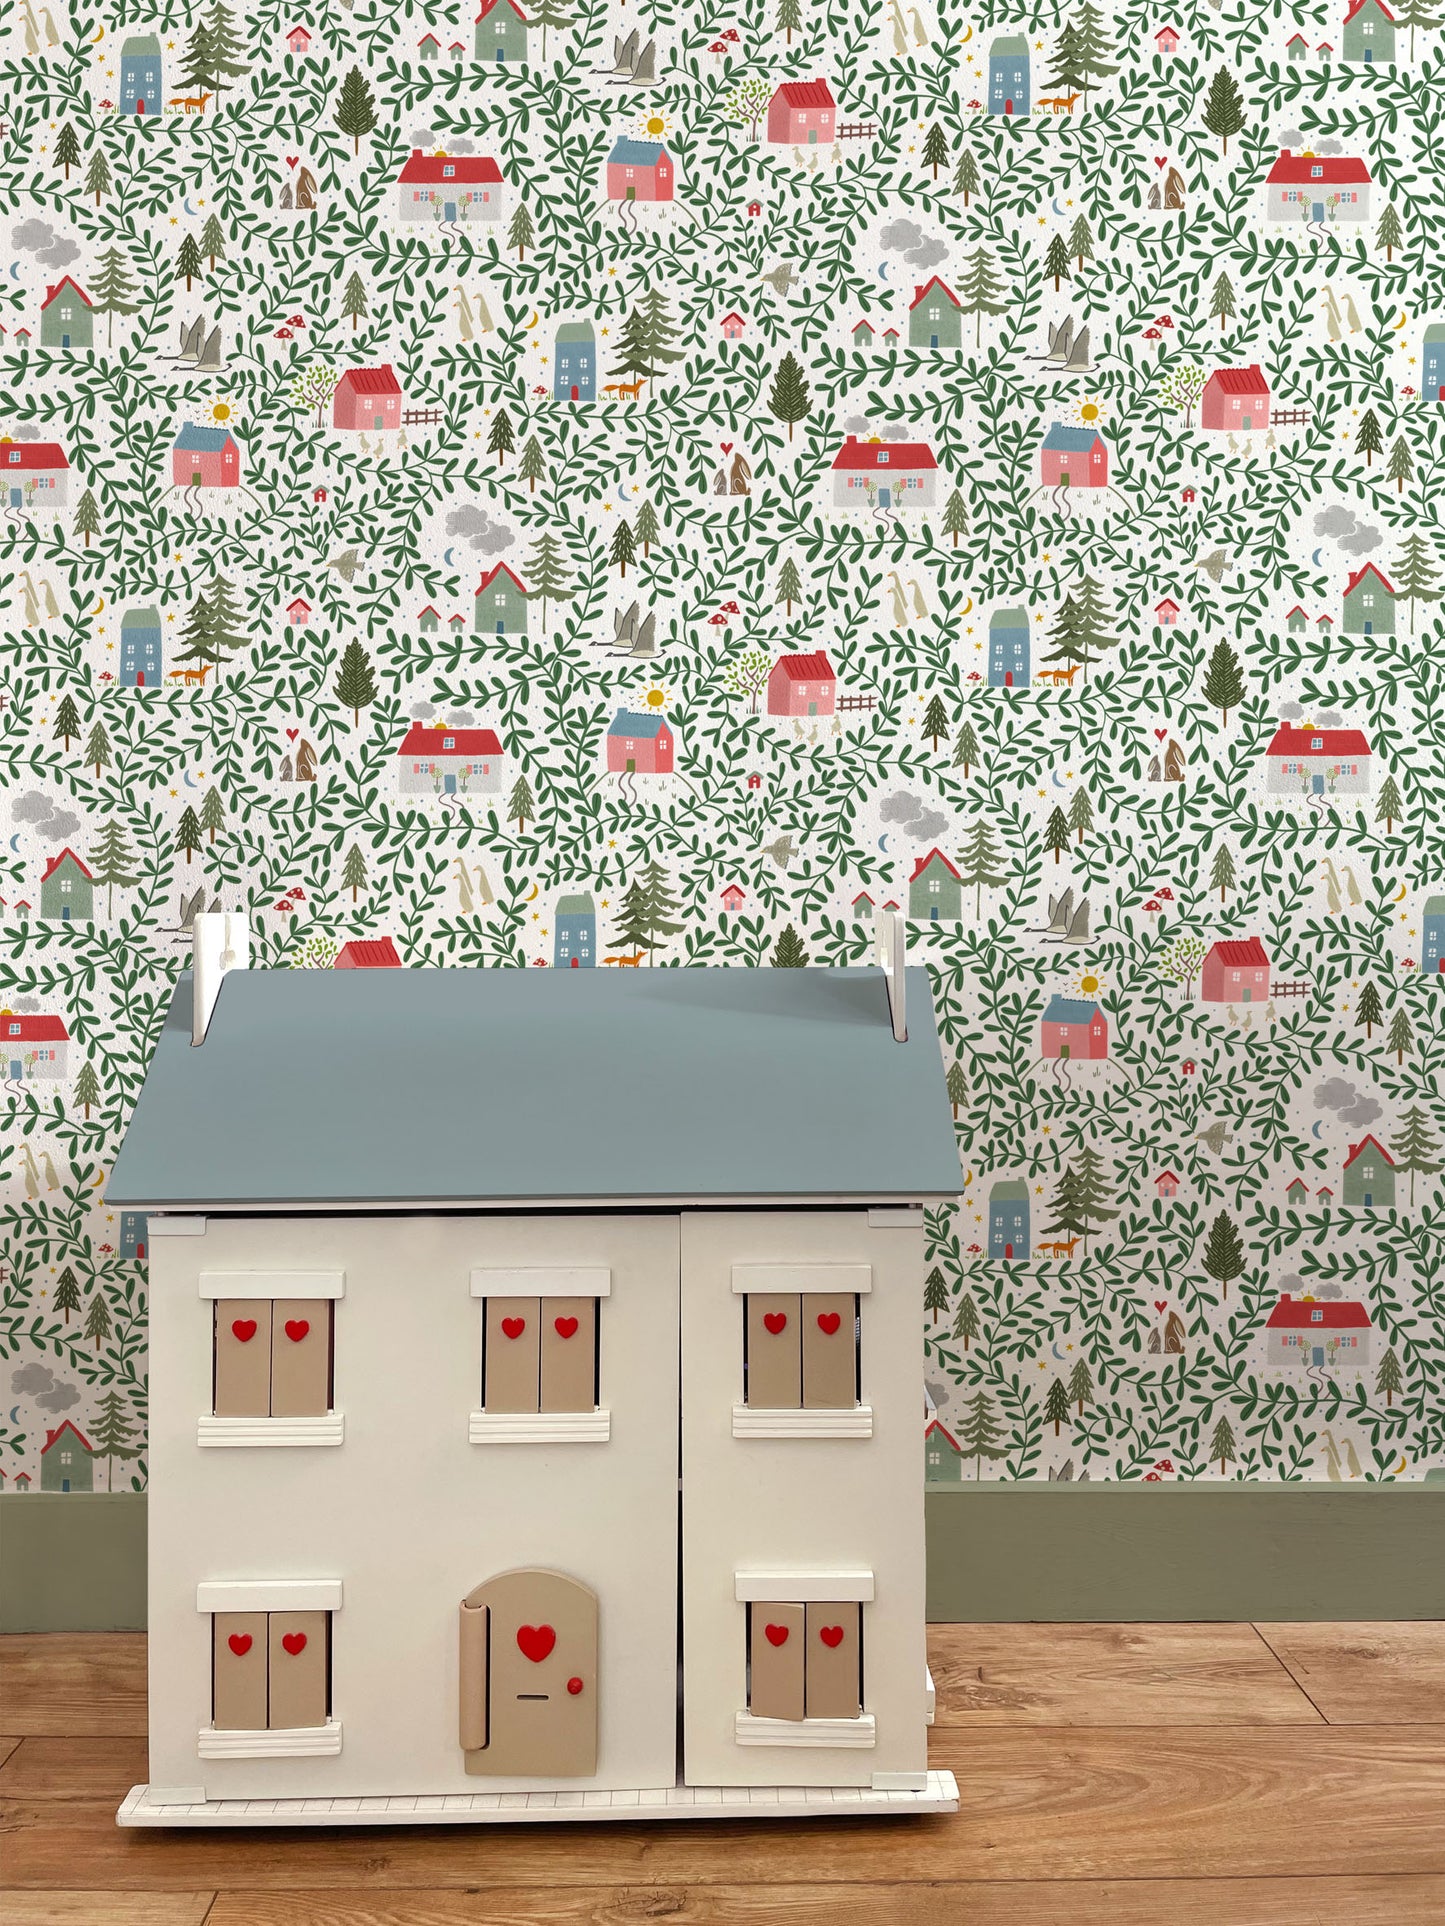 English Country Cottages Luxury Children's Wallpaper with green painted skirting board and Dollhouse with heart shutters